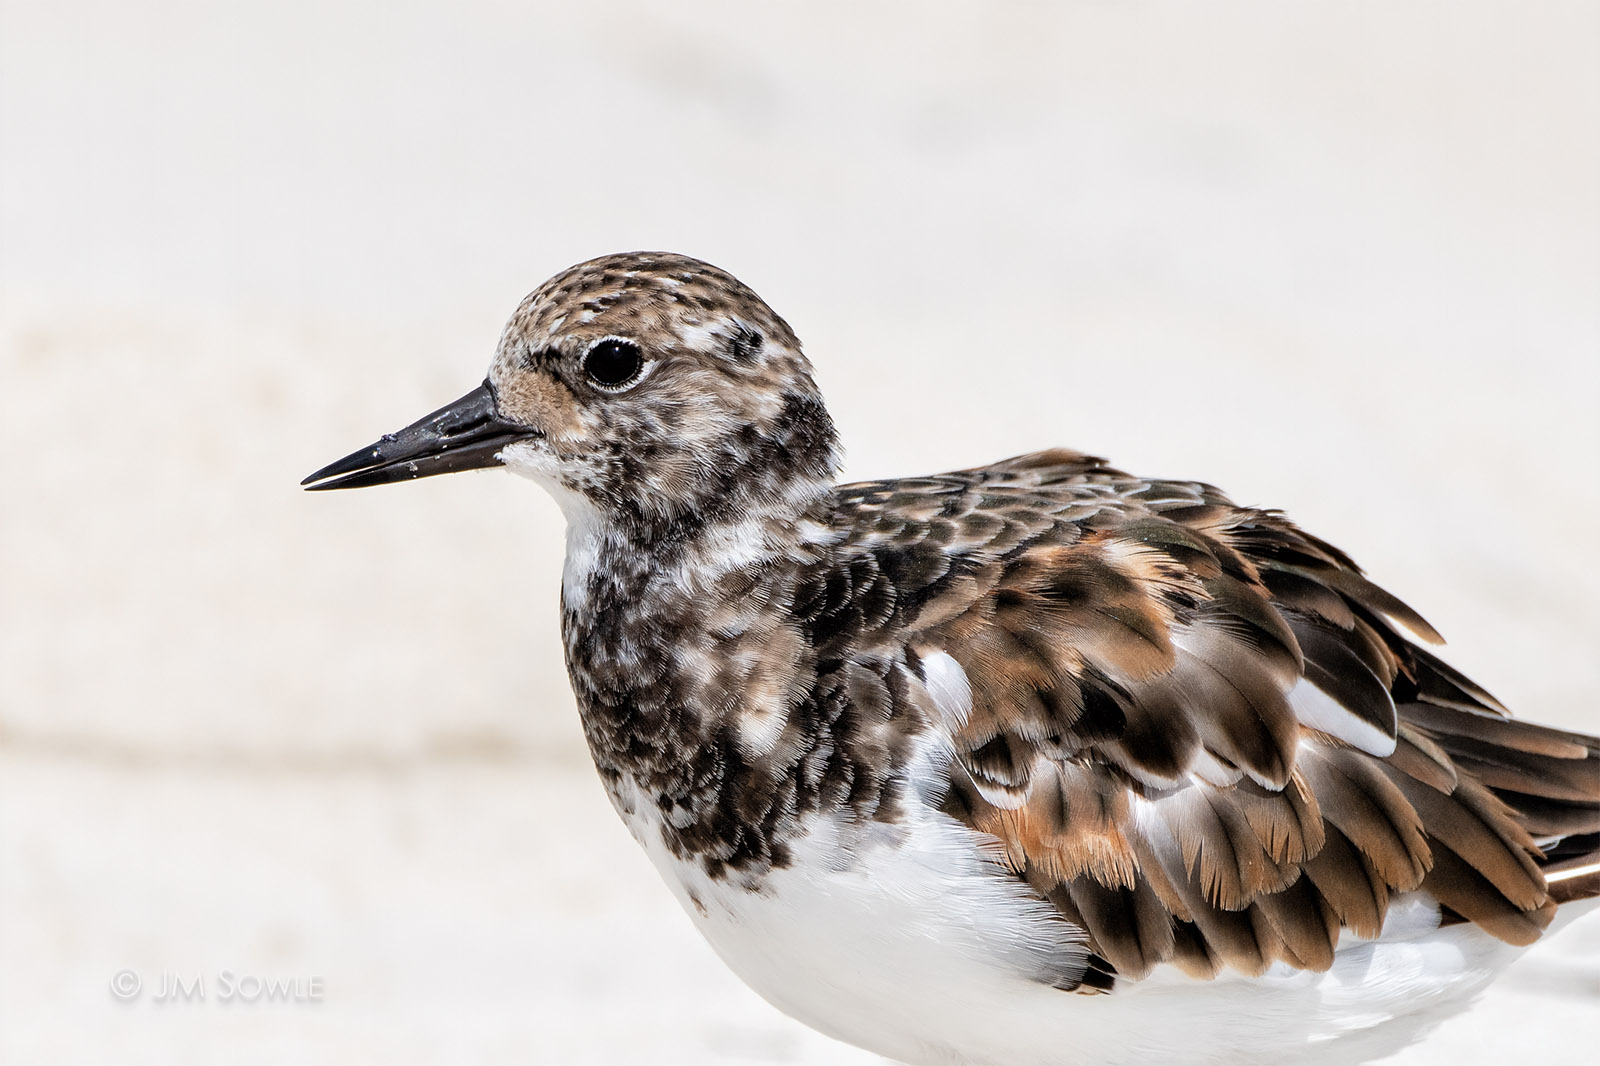 _JMS0301GPs2z_1600.jpg - A close up view of a Ruddy Turnstone.  These little peepers are always on the go, but I caught this one pausing for 0.001 seconds.